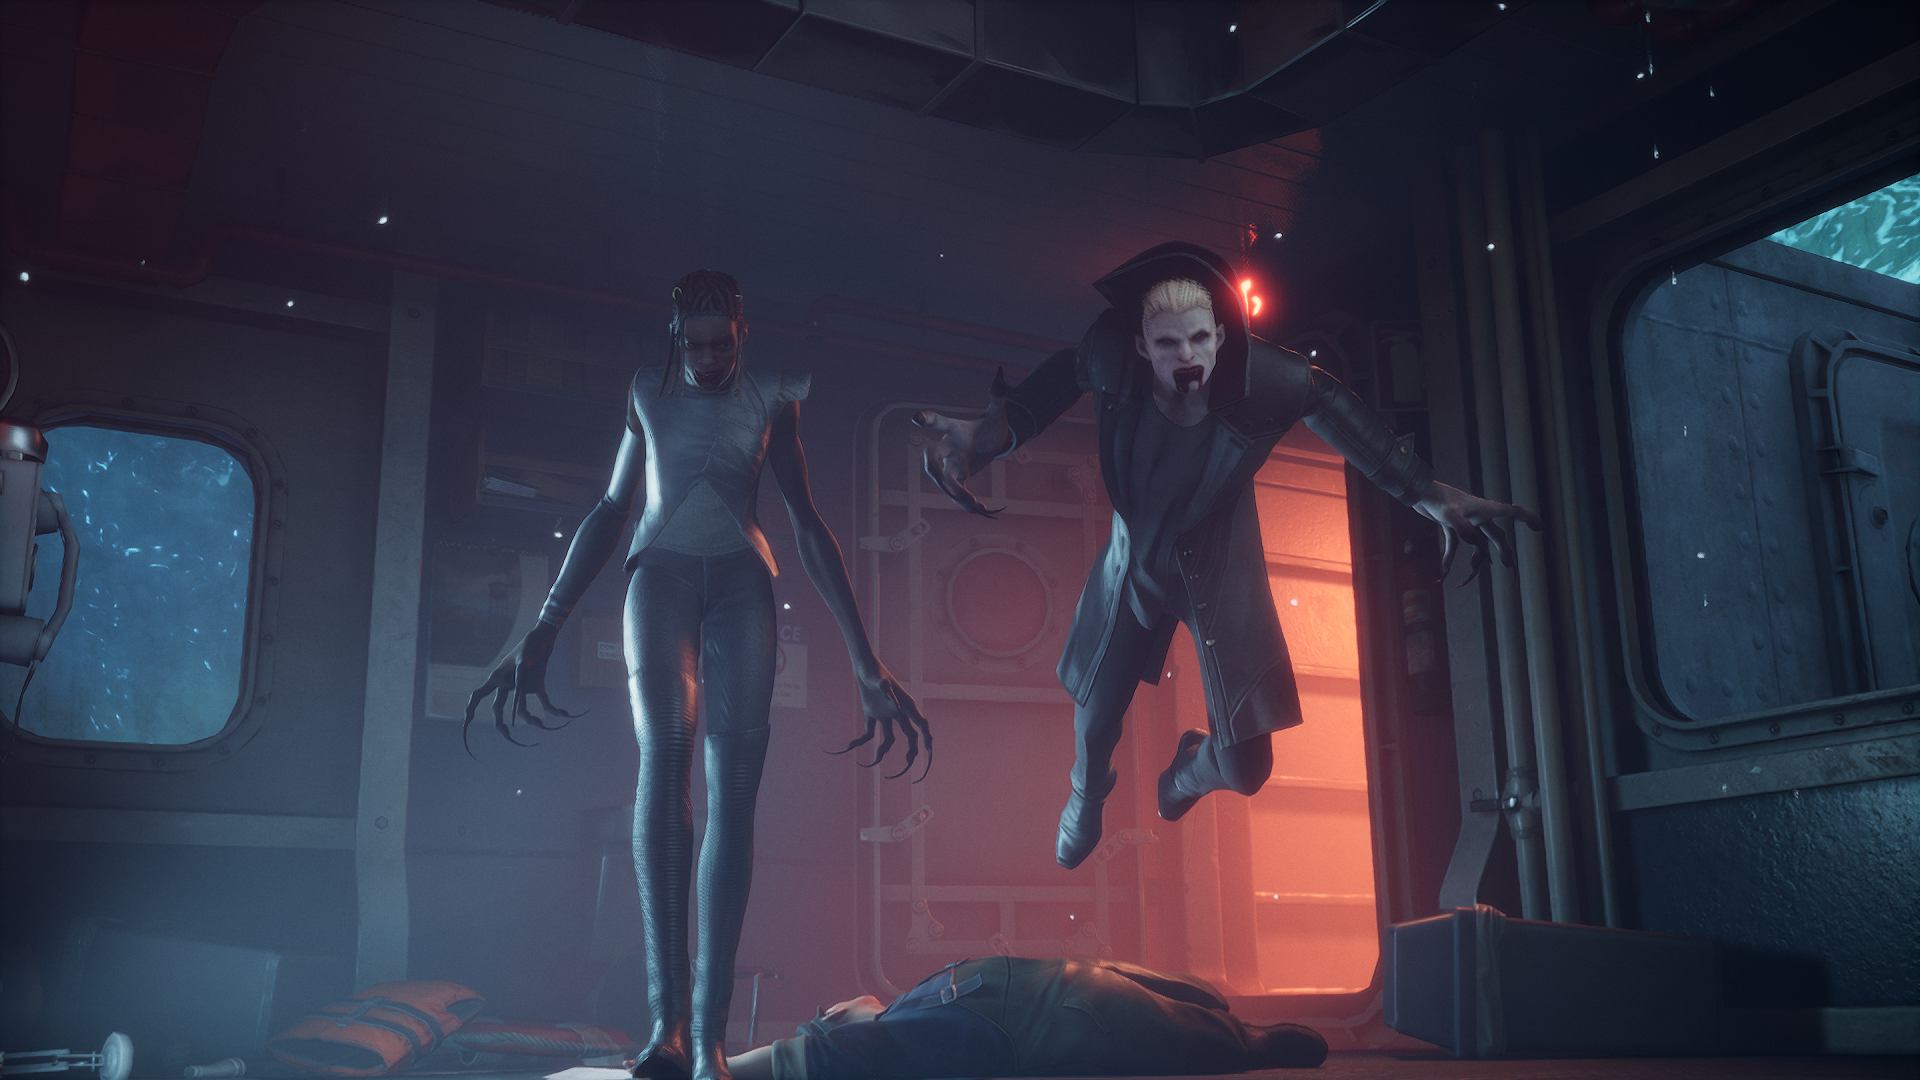 Redfall Gets Five Minutes of Vampire-Slaying Gameplay